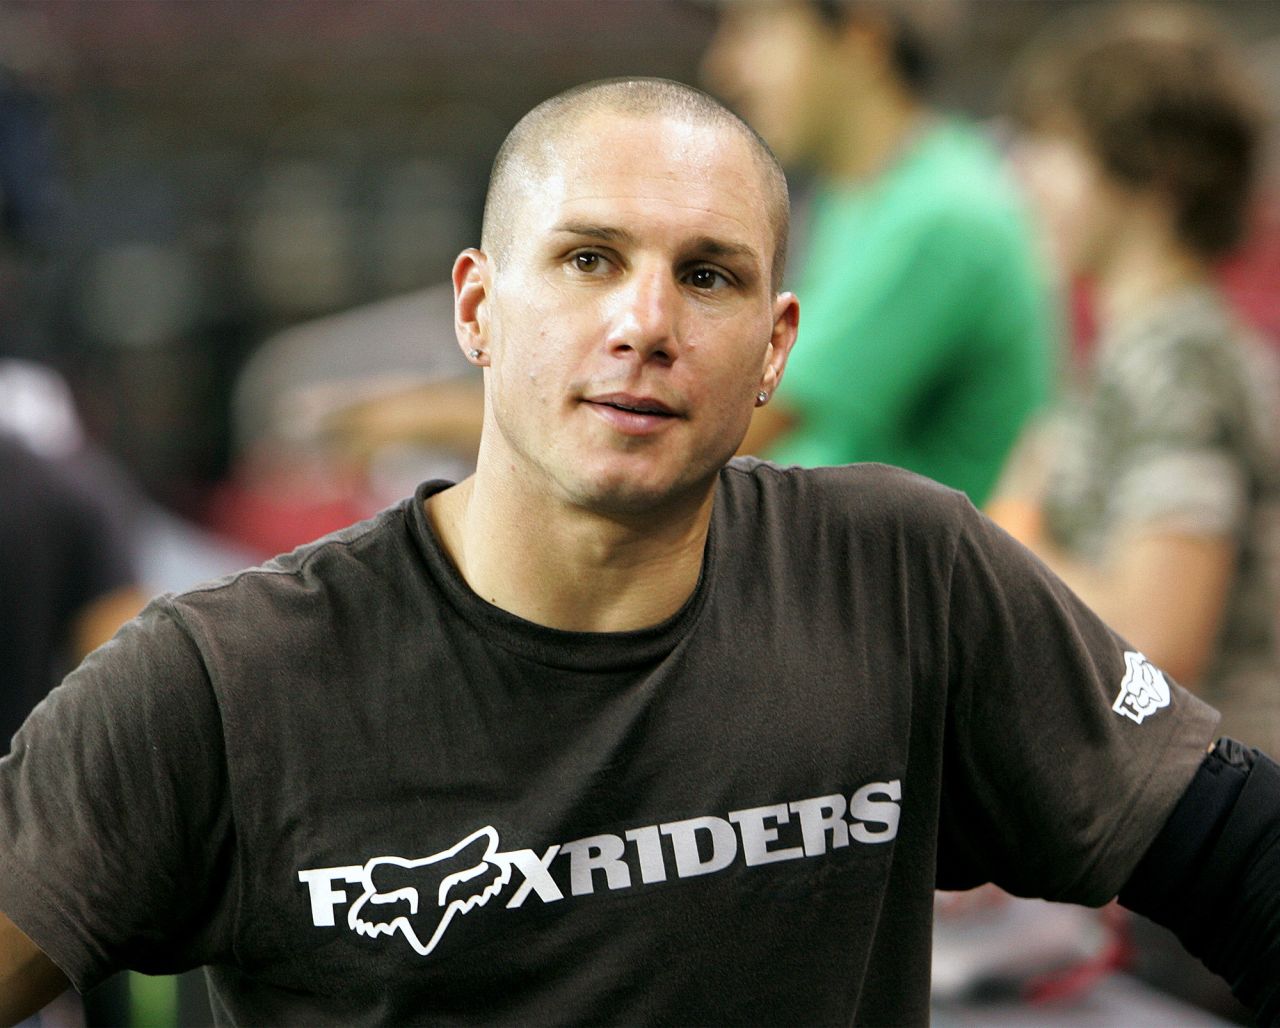 <a href="http://www.cnn.com/2016/02/05/us/dave-mirra-dies/" target="_blank">Dave Mirra</a>, whose dazzling aerial flips and tricks made him a legend in freestyle BMX, died February 4 of an apparent self-inflicted gunshot wound, police in North Carolina said. He was 41.